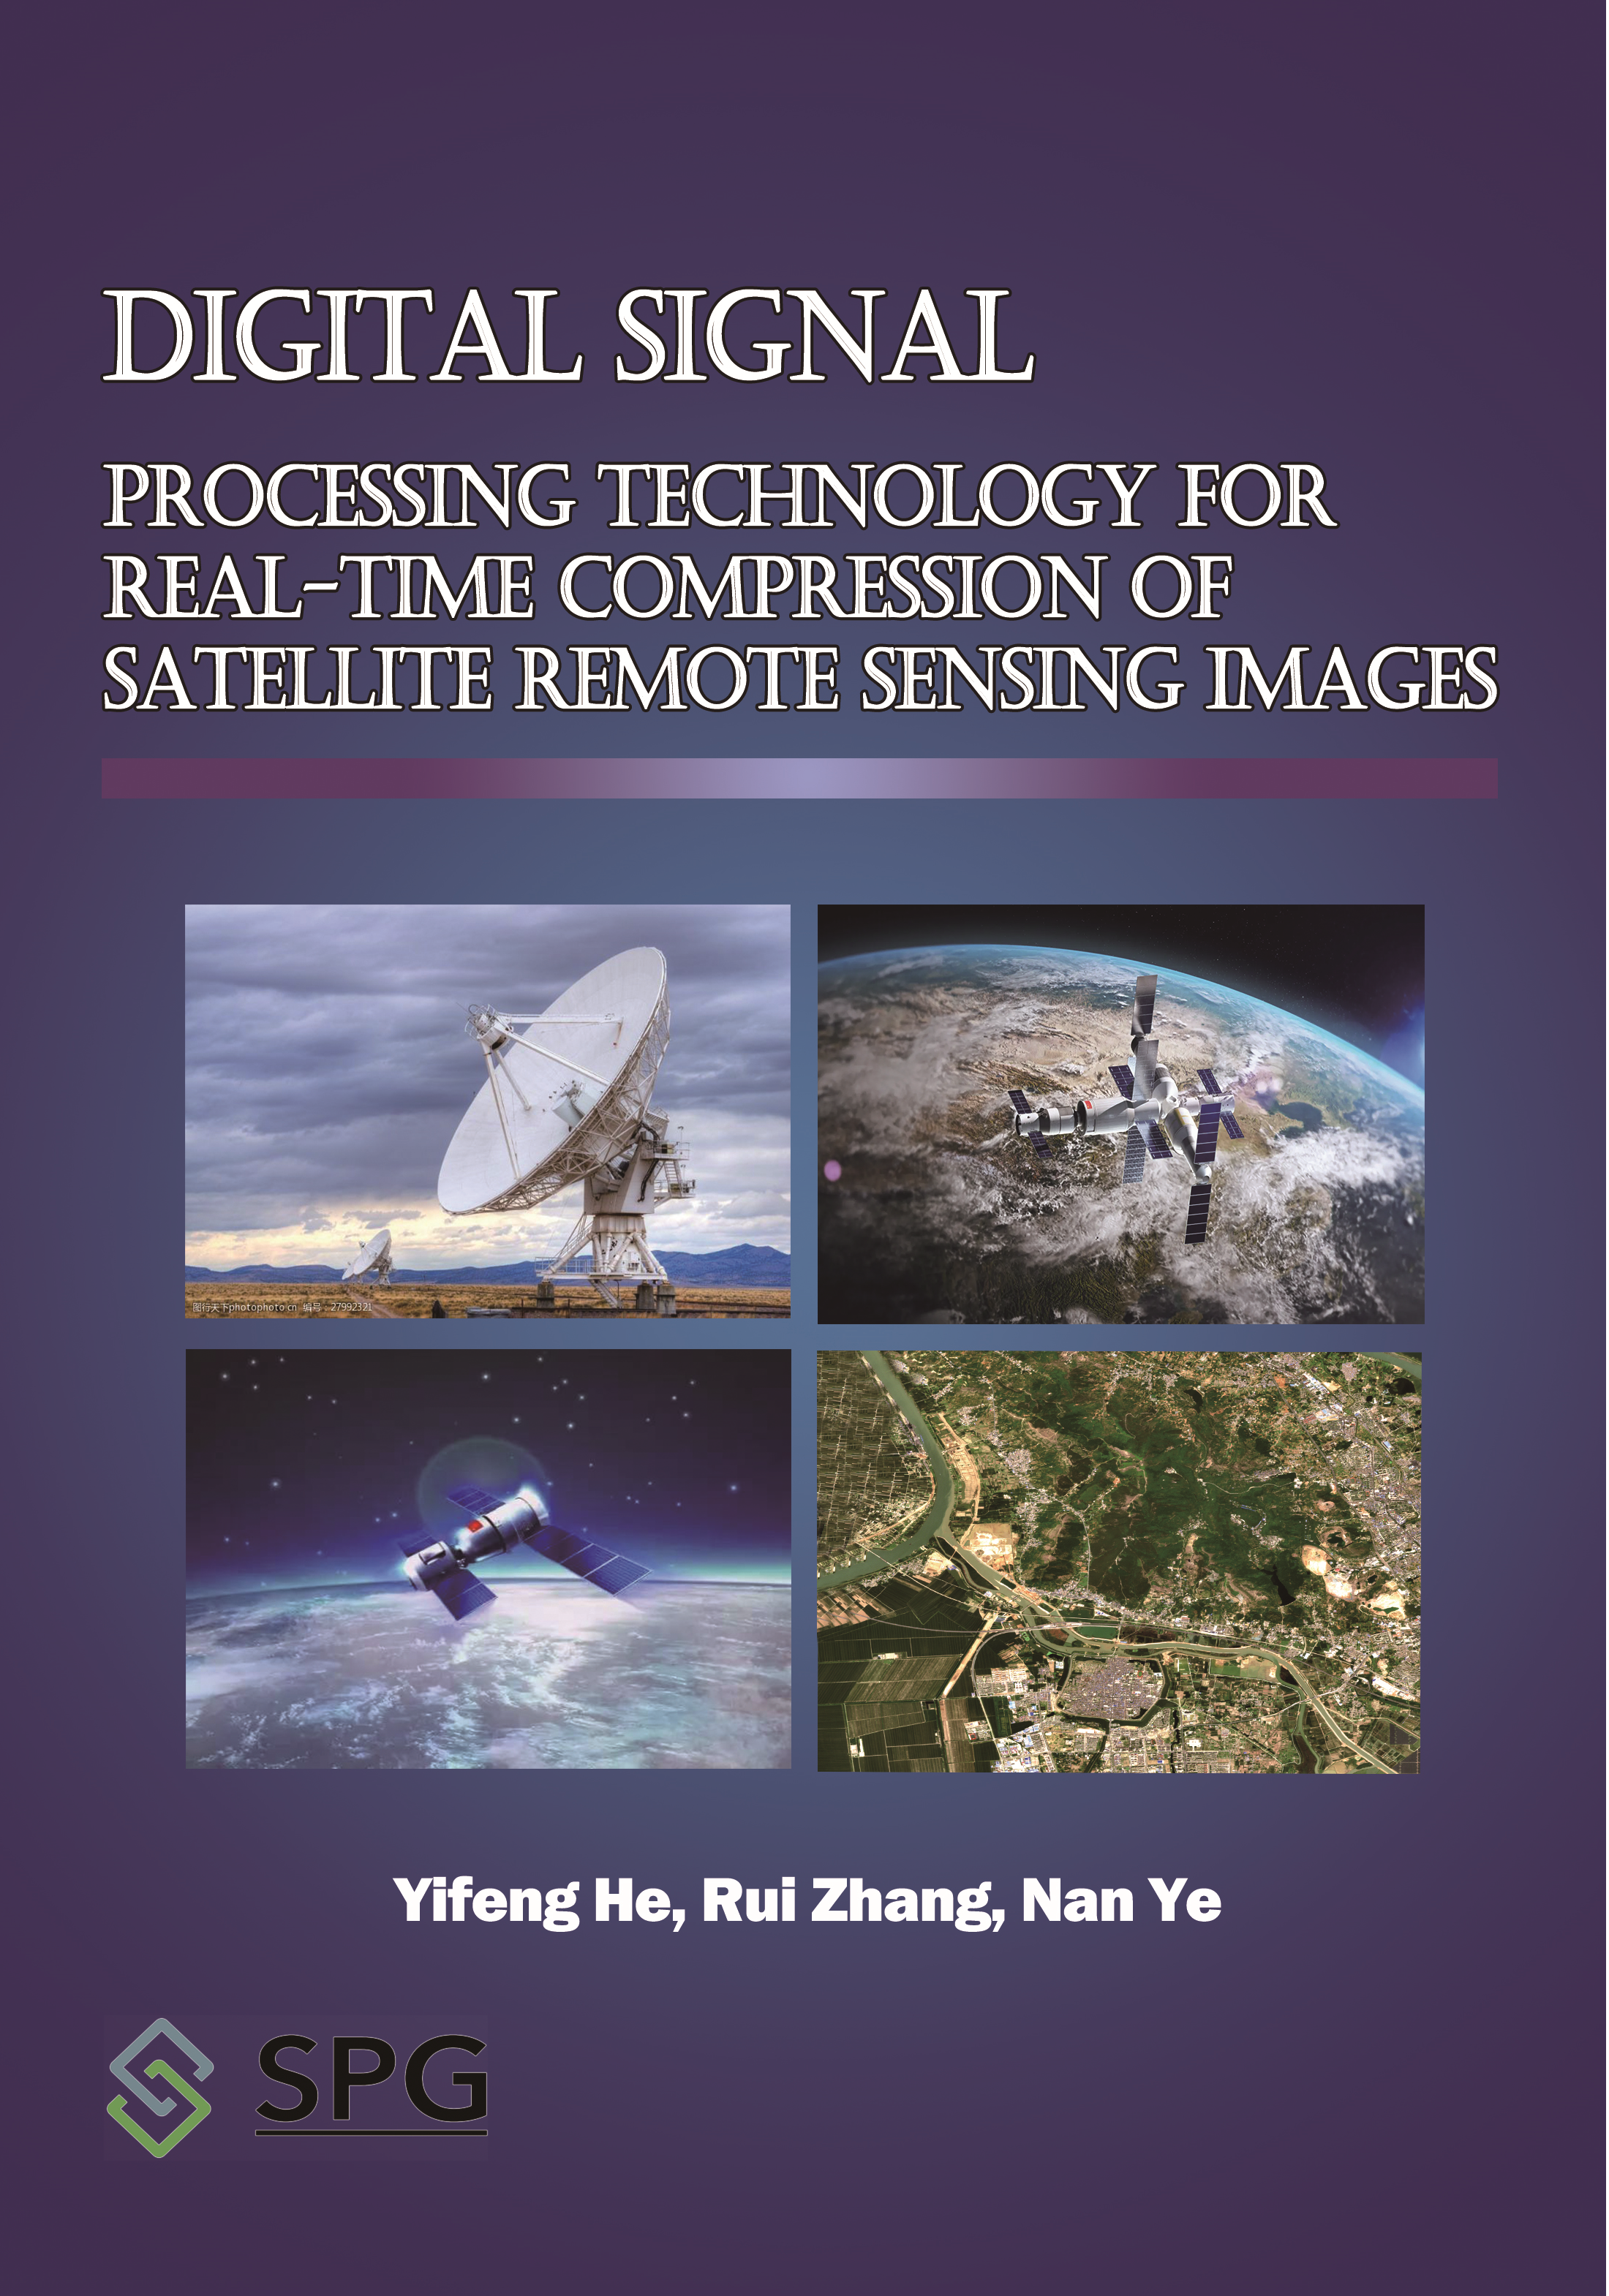 Digital Signal Processing Technology for Real-time Compression of Satellite Remote Sensing Images | Scholar Publishing Group